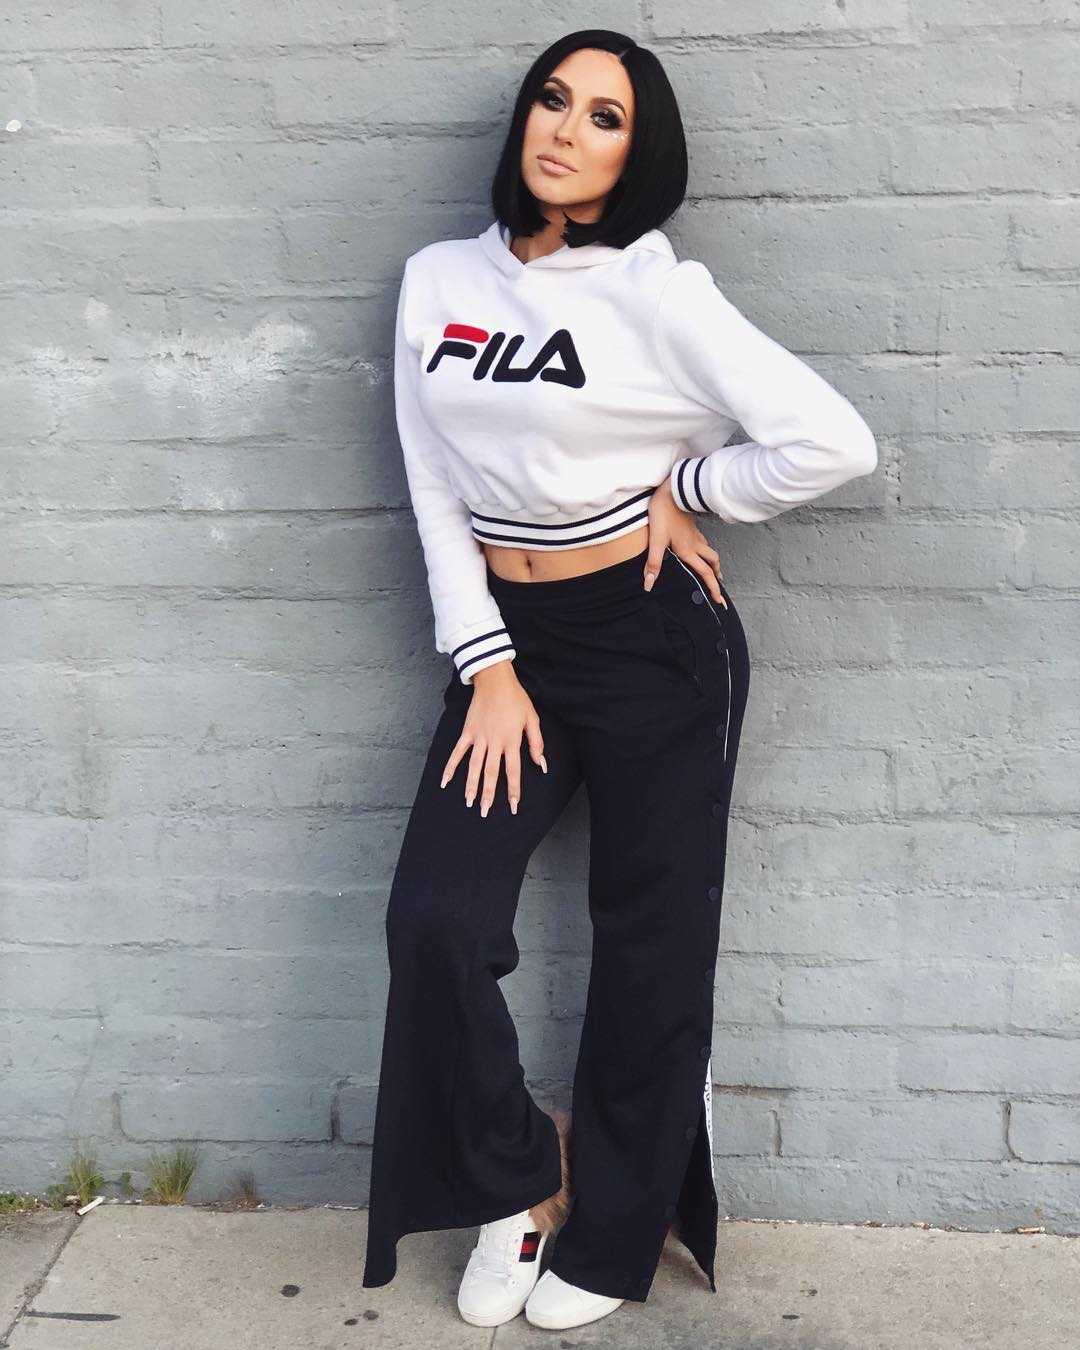 51 Sexy Jaclyn Hill Boobs Pictures Will Induce Passionate Feelings for Her 45